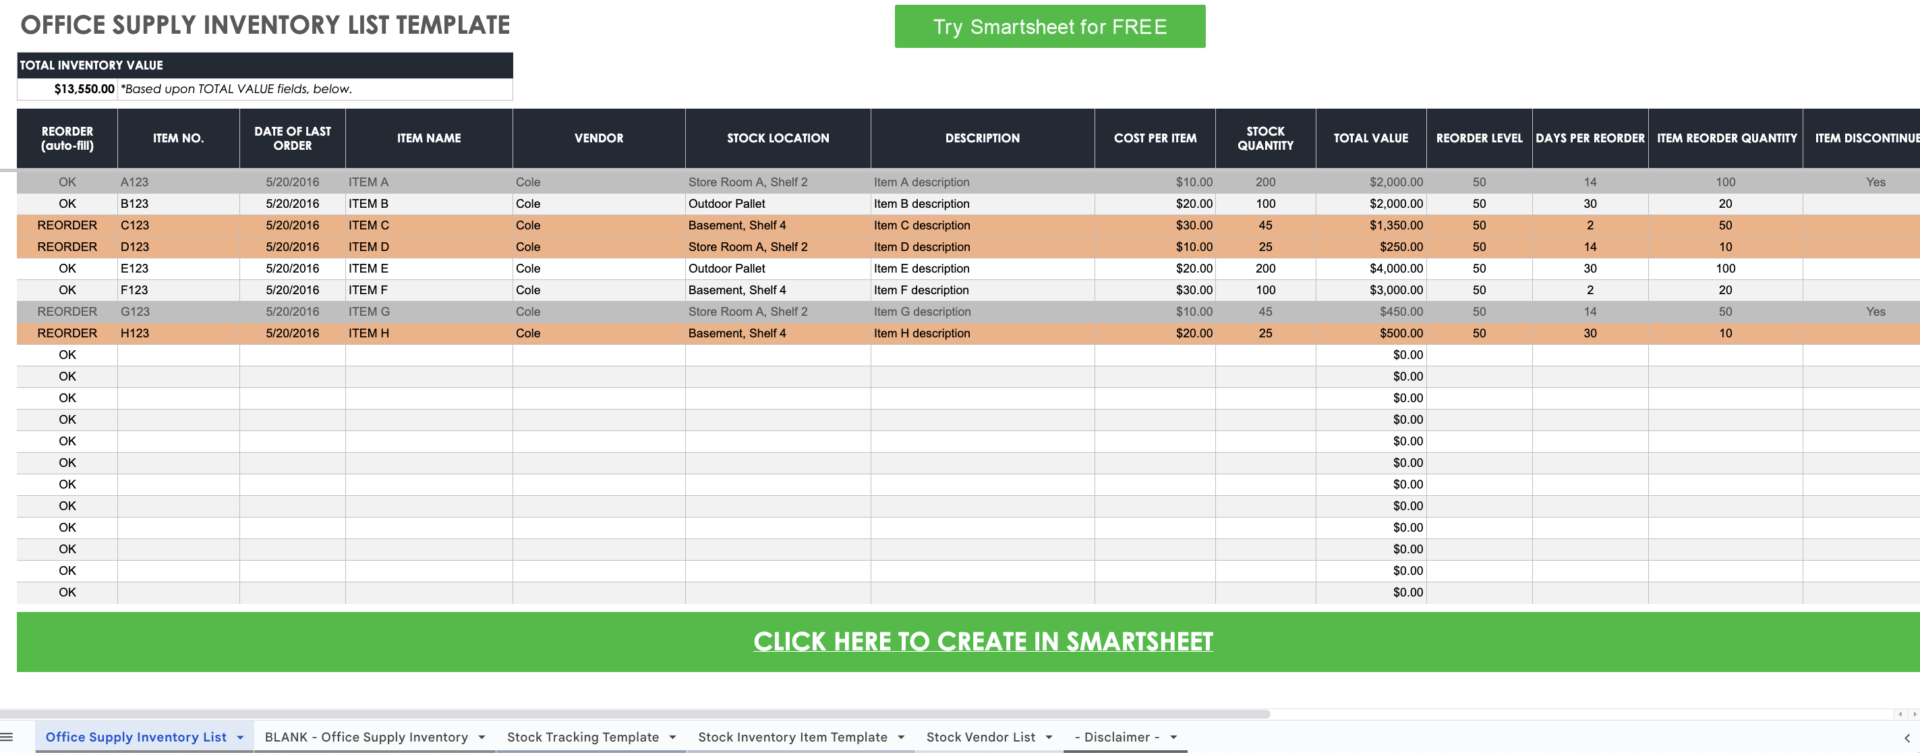 Image of template from Smartsheet